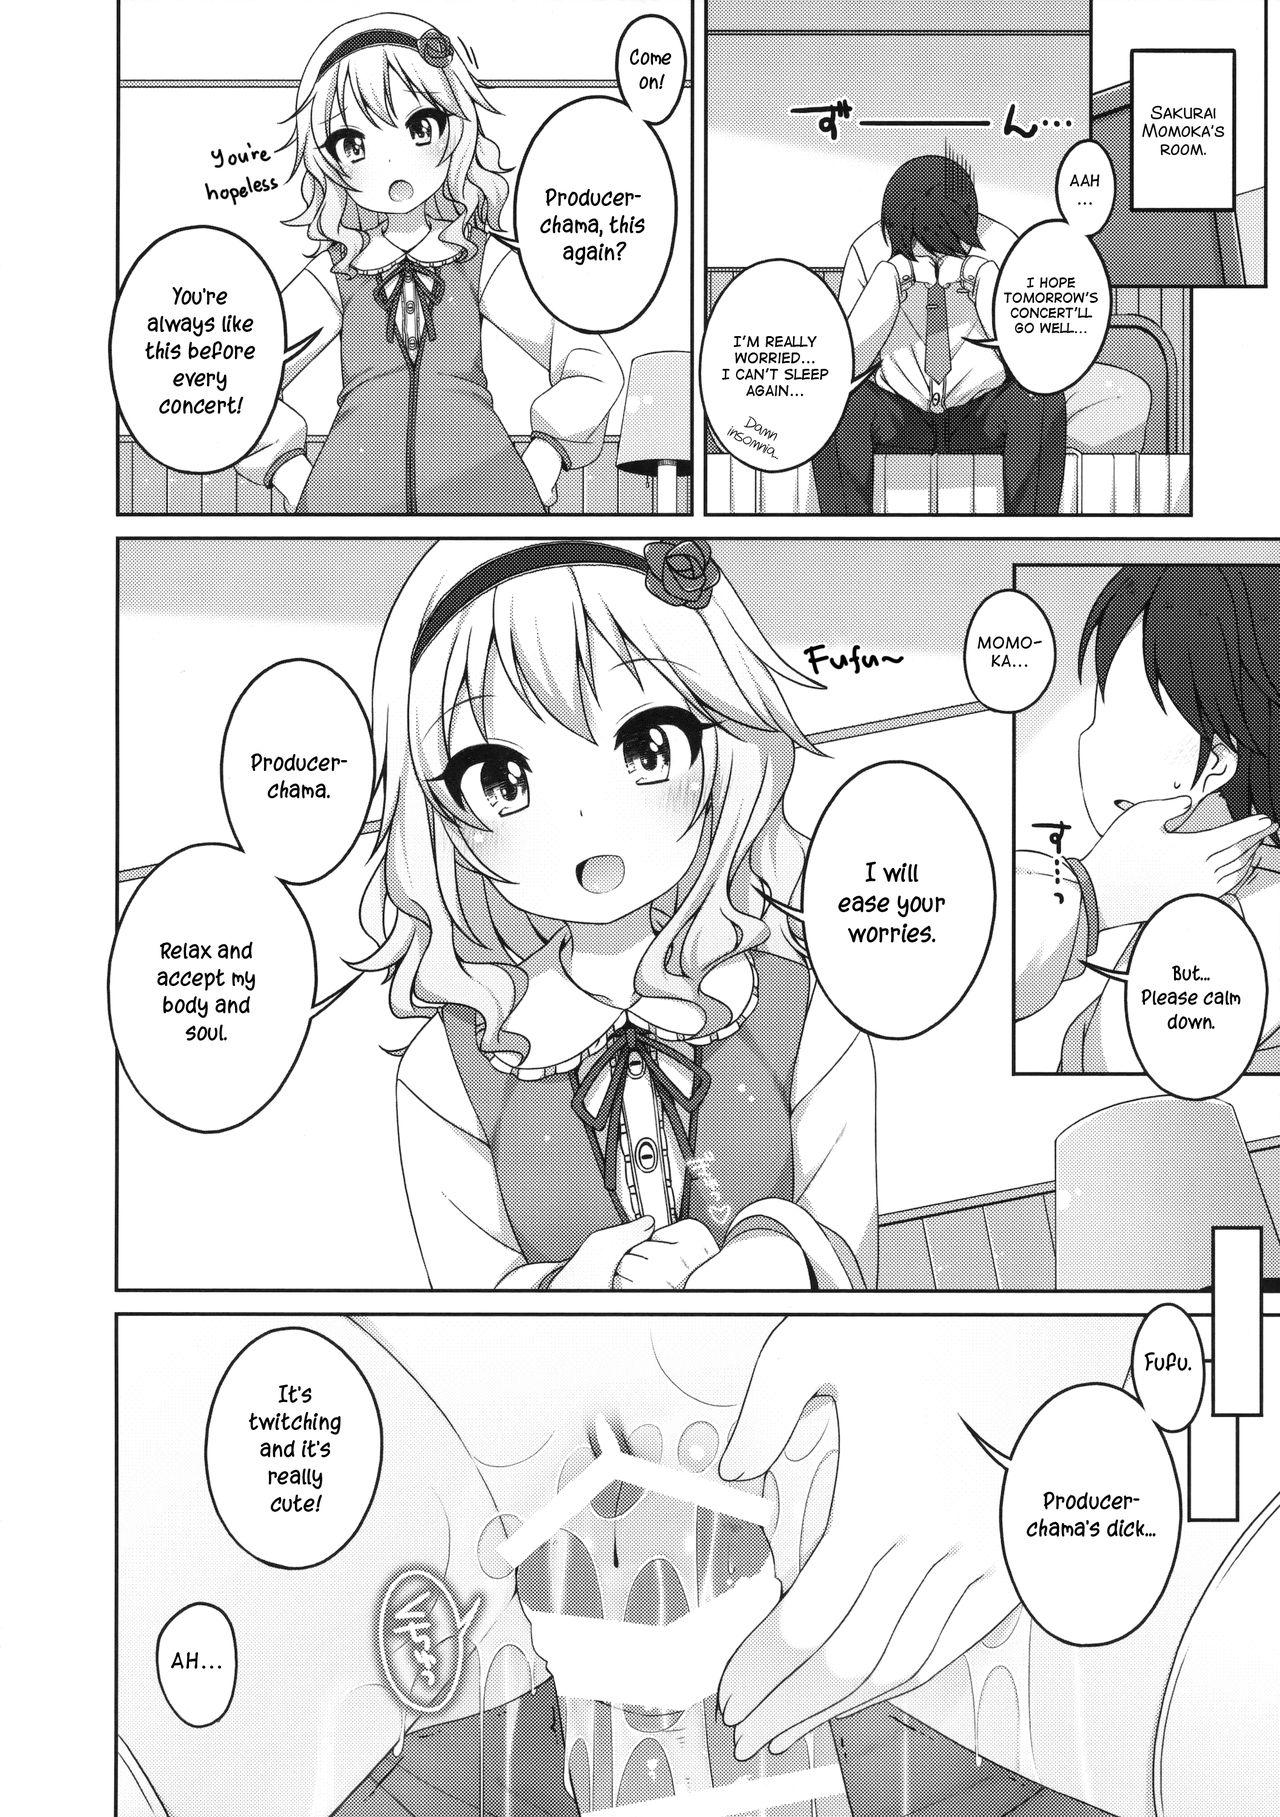 Anale Live no Mae no Hi wa | The day before the concert - The idolmaster Fake - Page 7